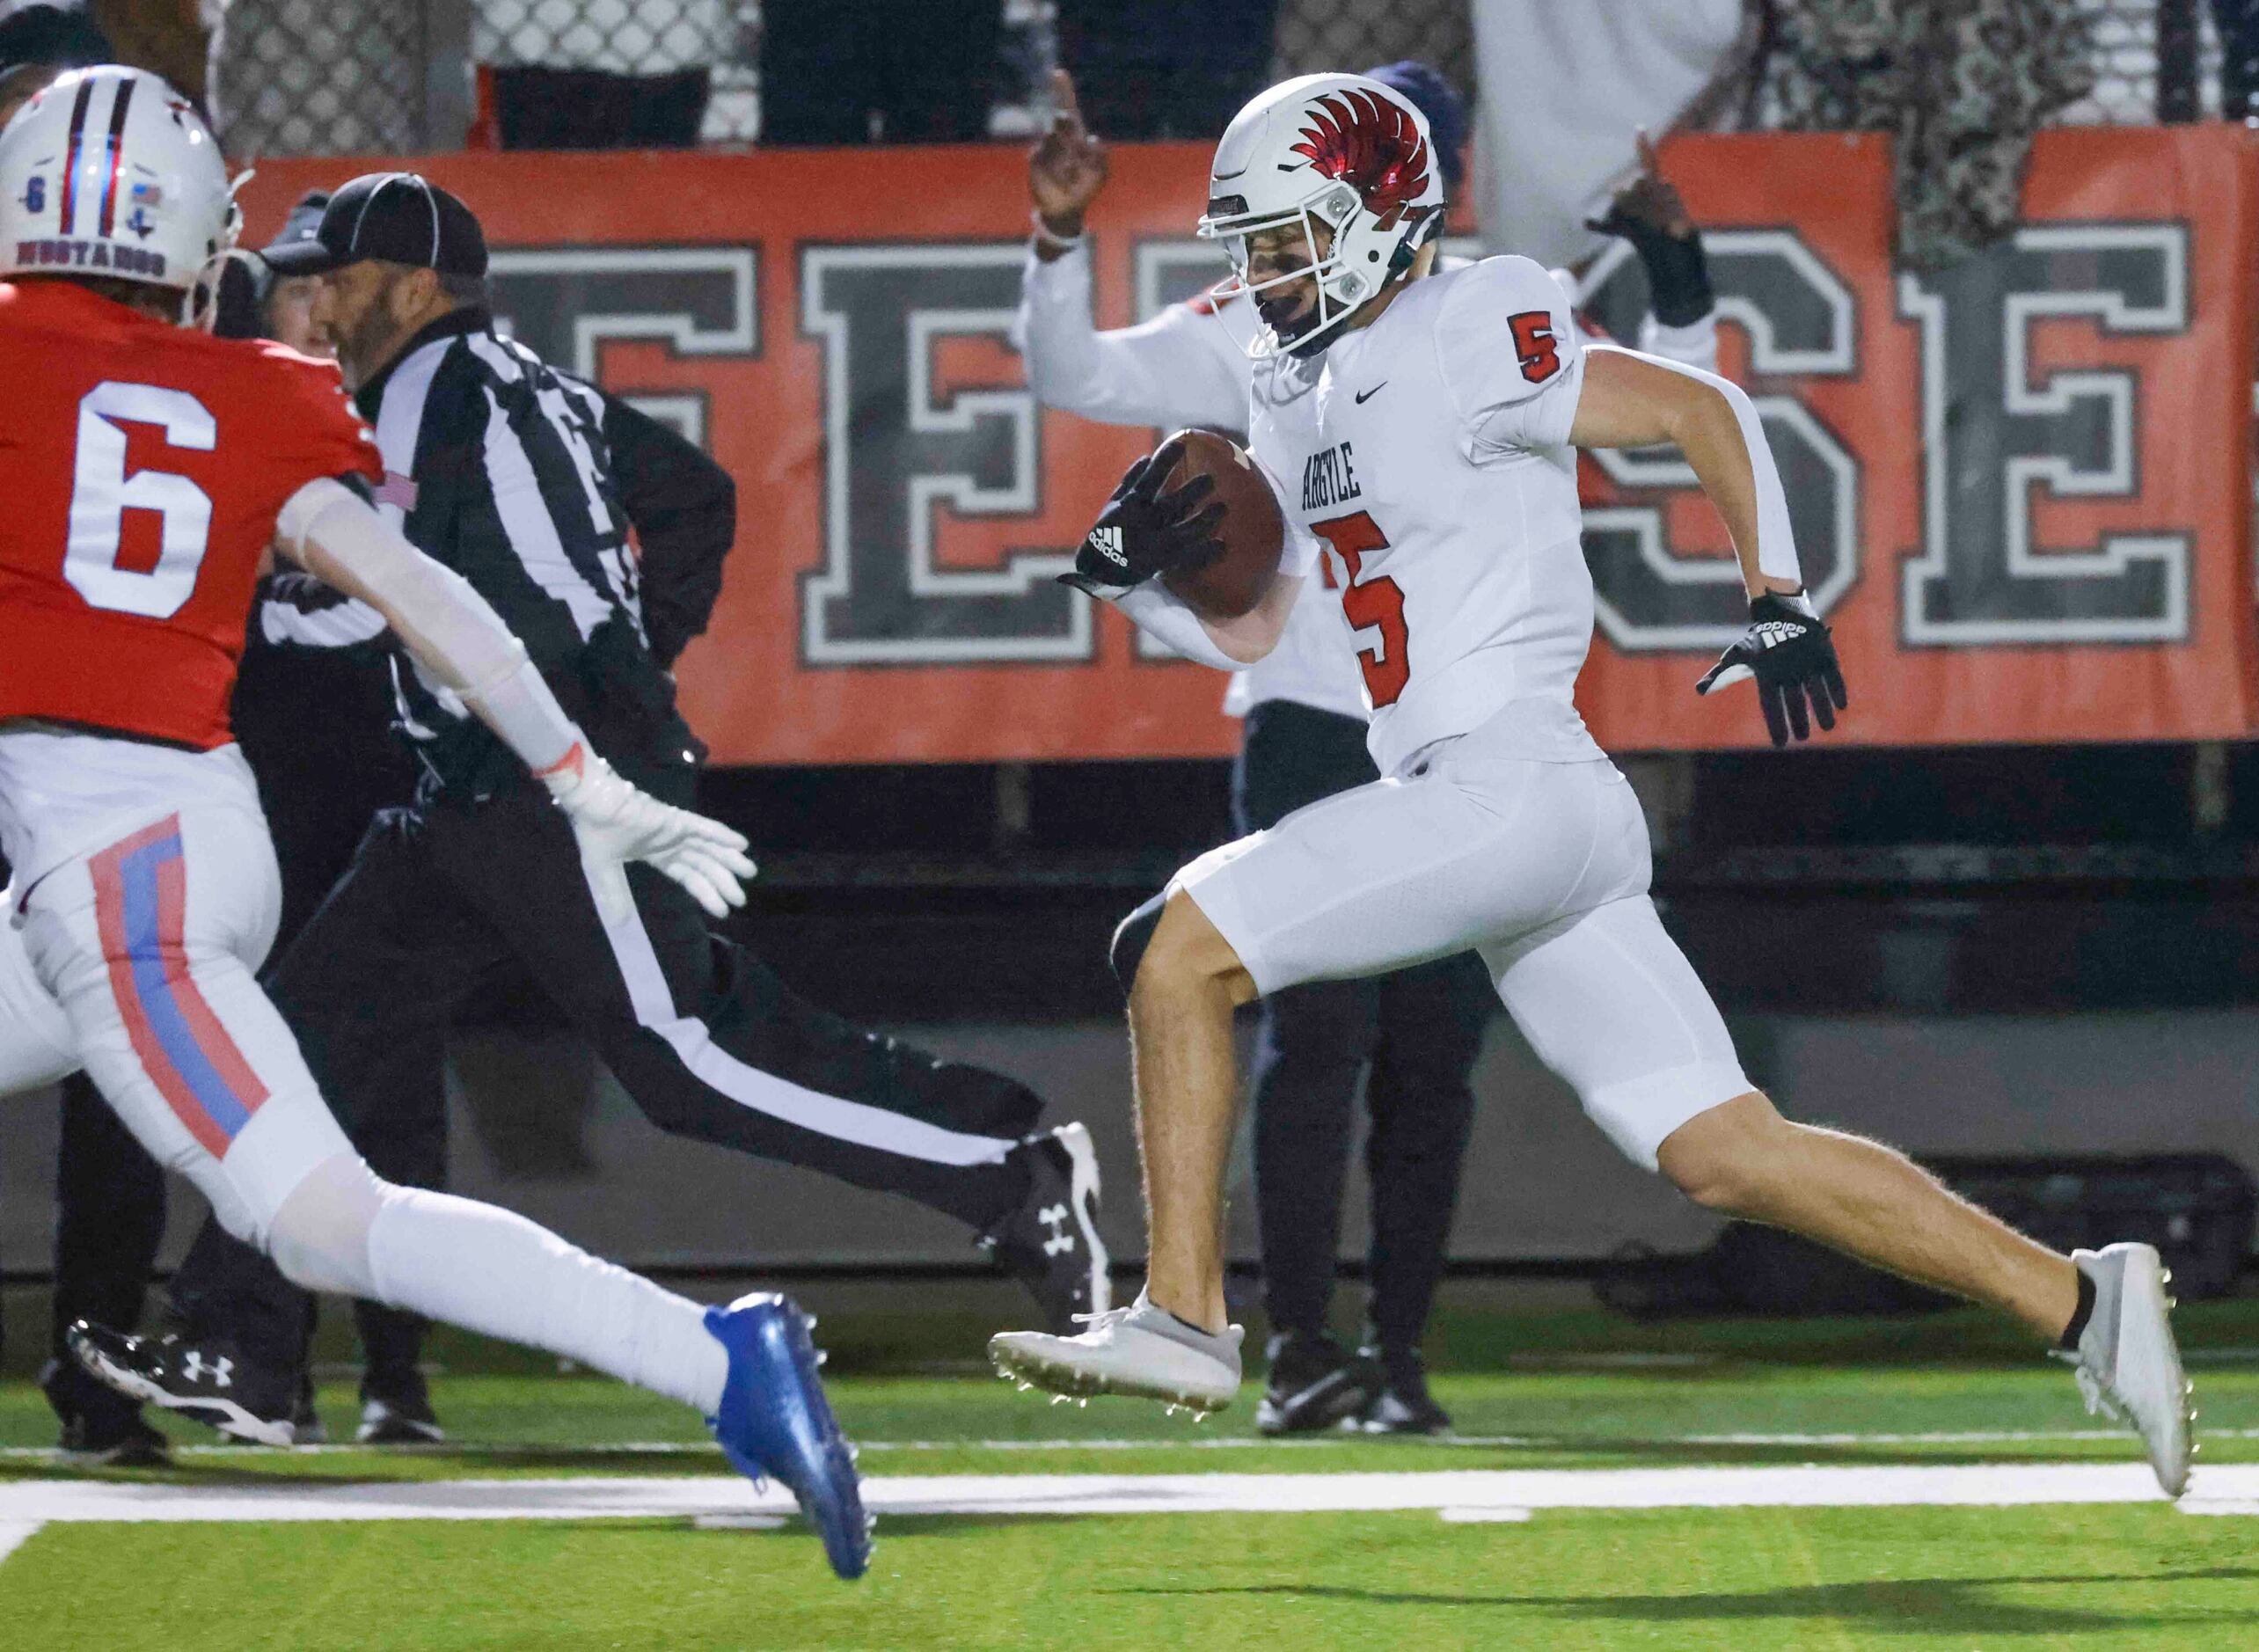 Argyle high’s Will Hodson (5) runs to complete a touchdown against Grapevine High during the...